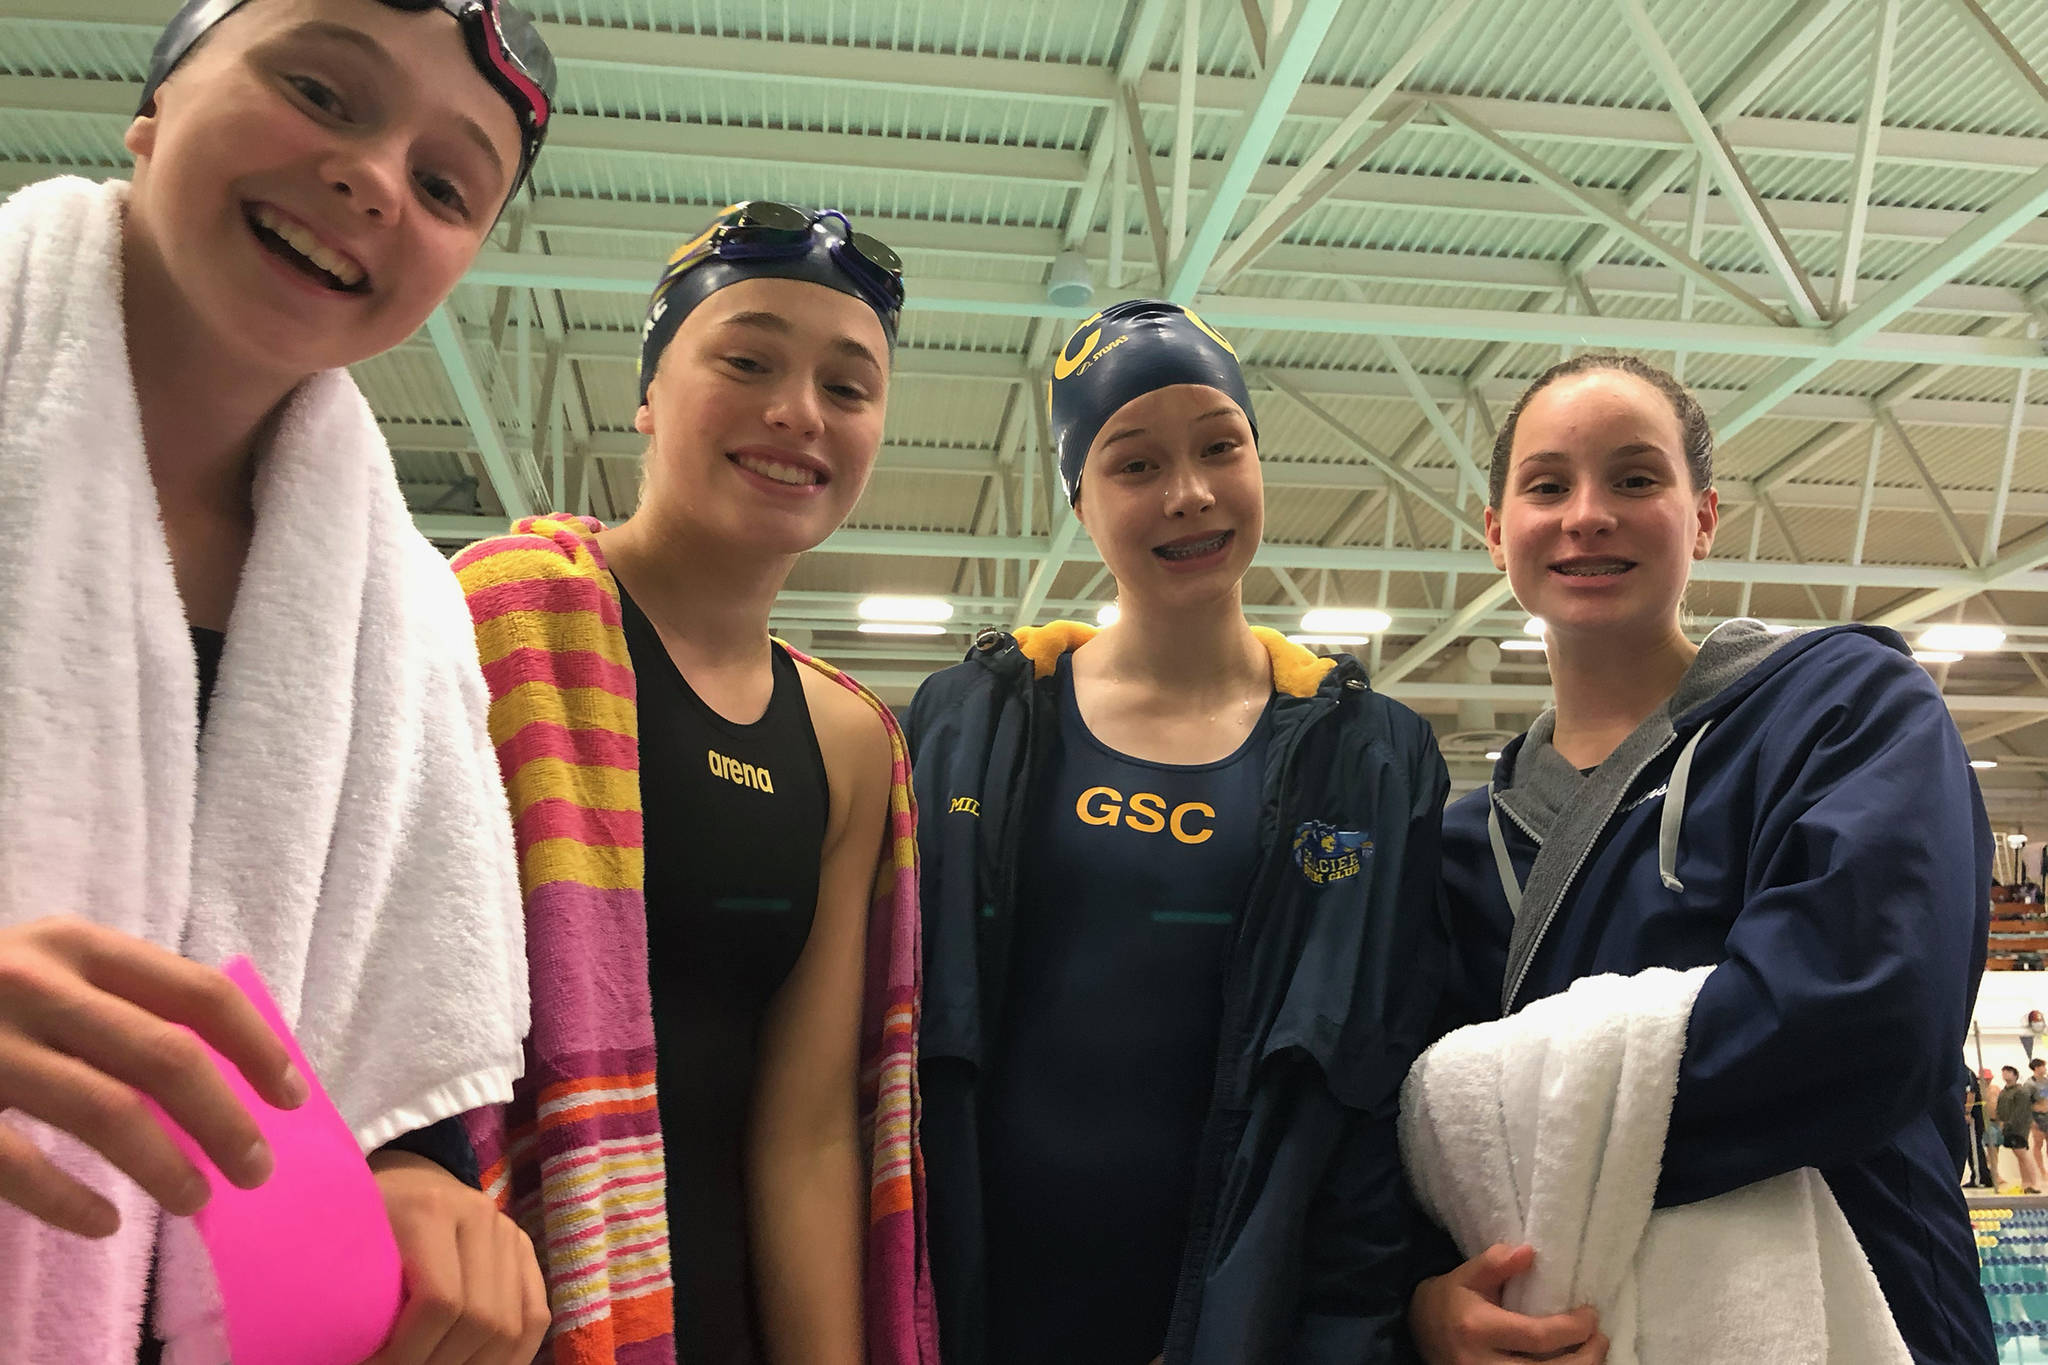 Members of Glacier Swim Club’s winning 13-14 girls 400-meter free relay team from Summer Champs pose for a photo. The team includes Valerie Peimann, Pacific Ricke, Dannan Mills and Caitlin Sanders. (Courtesy Photo)